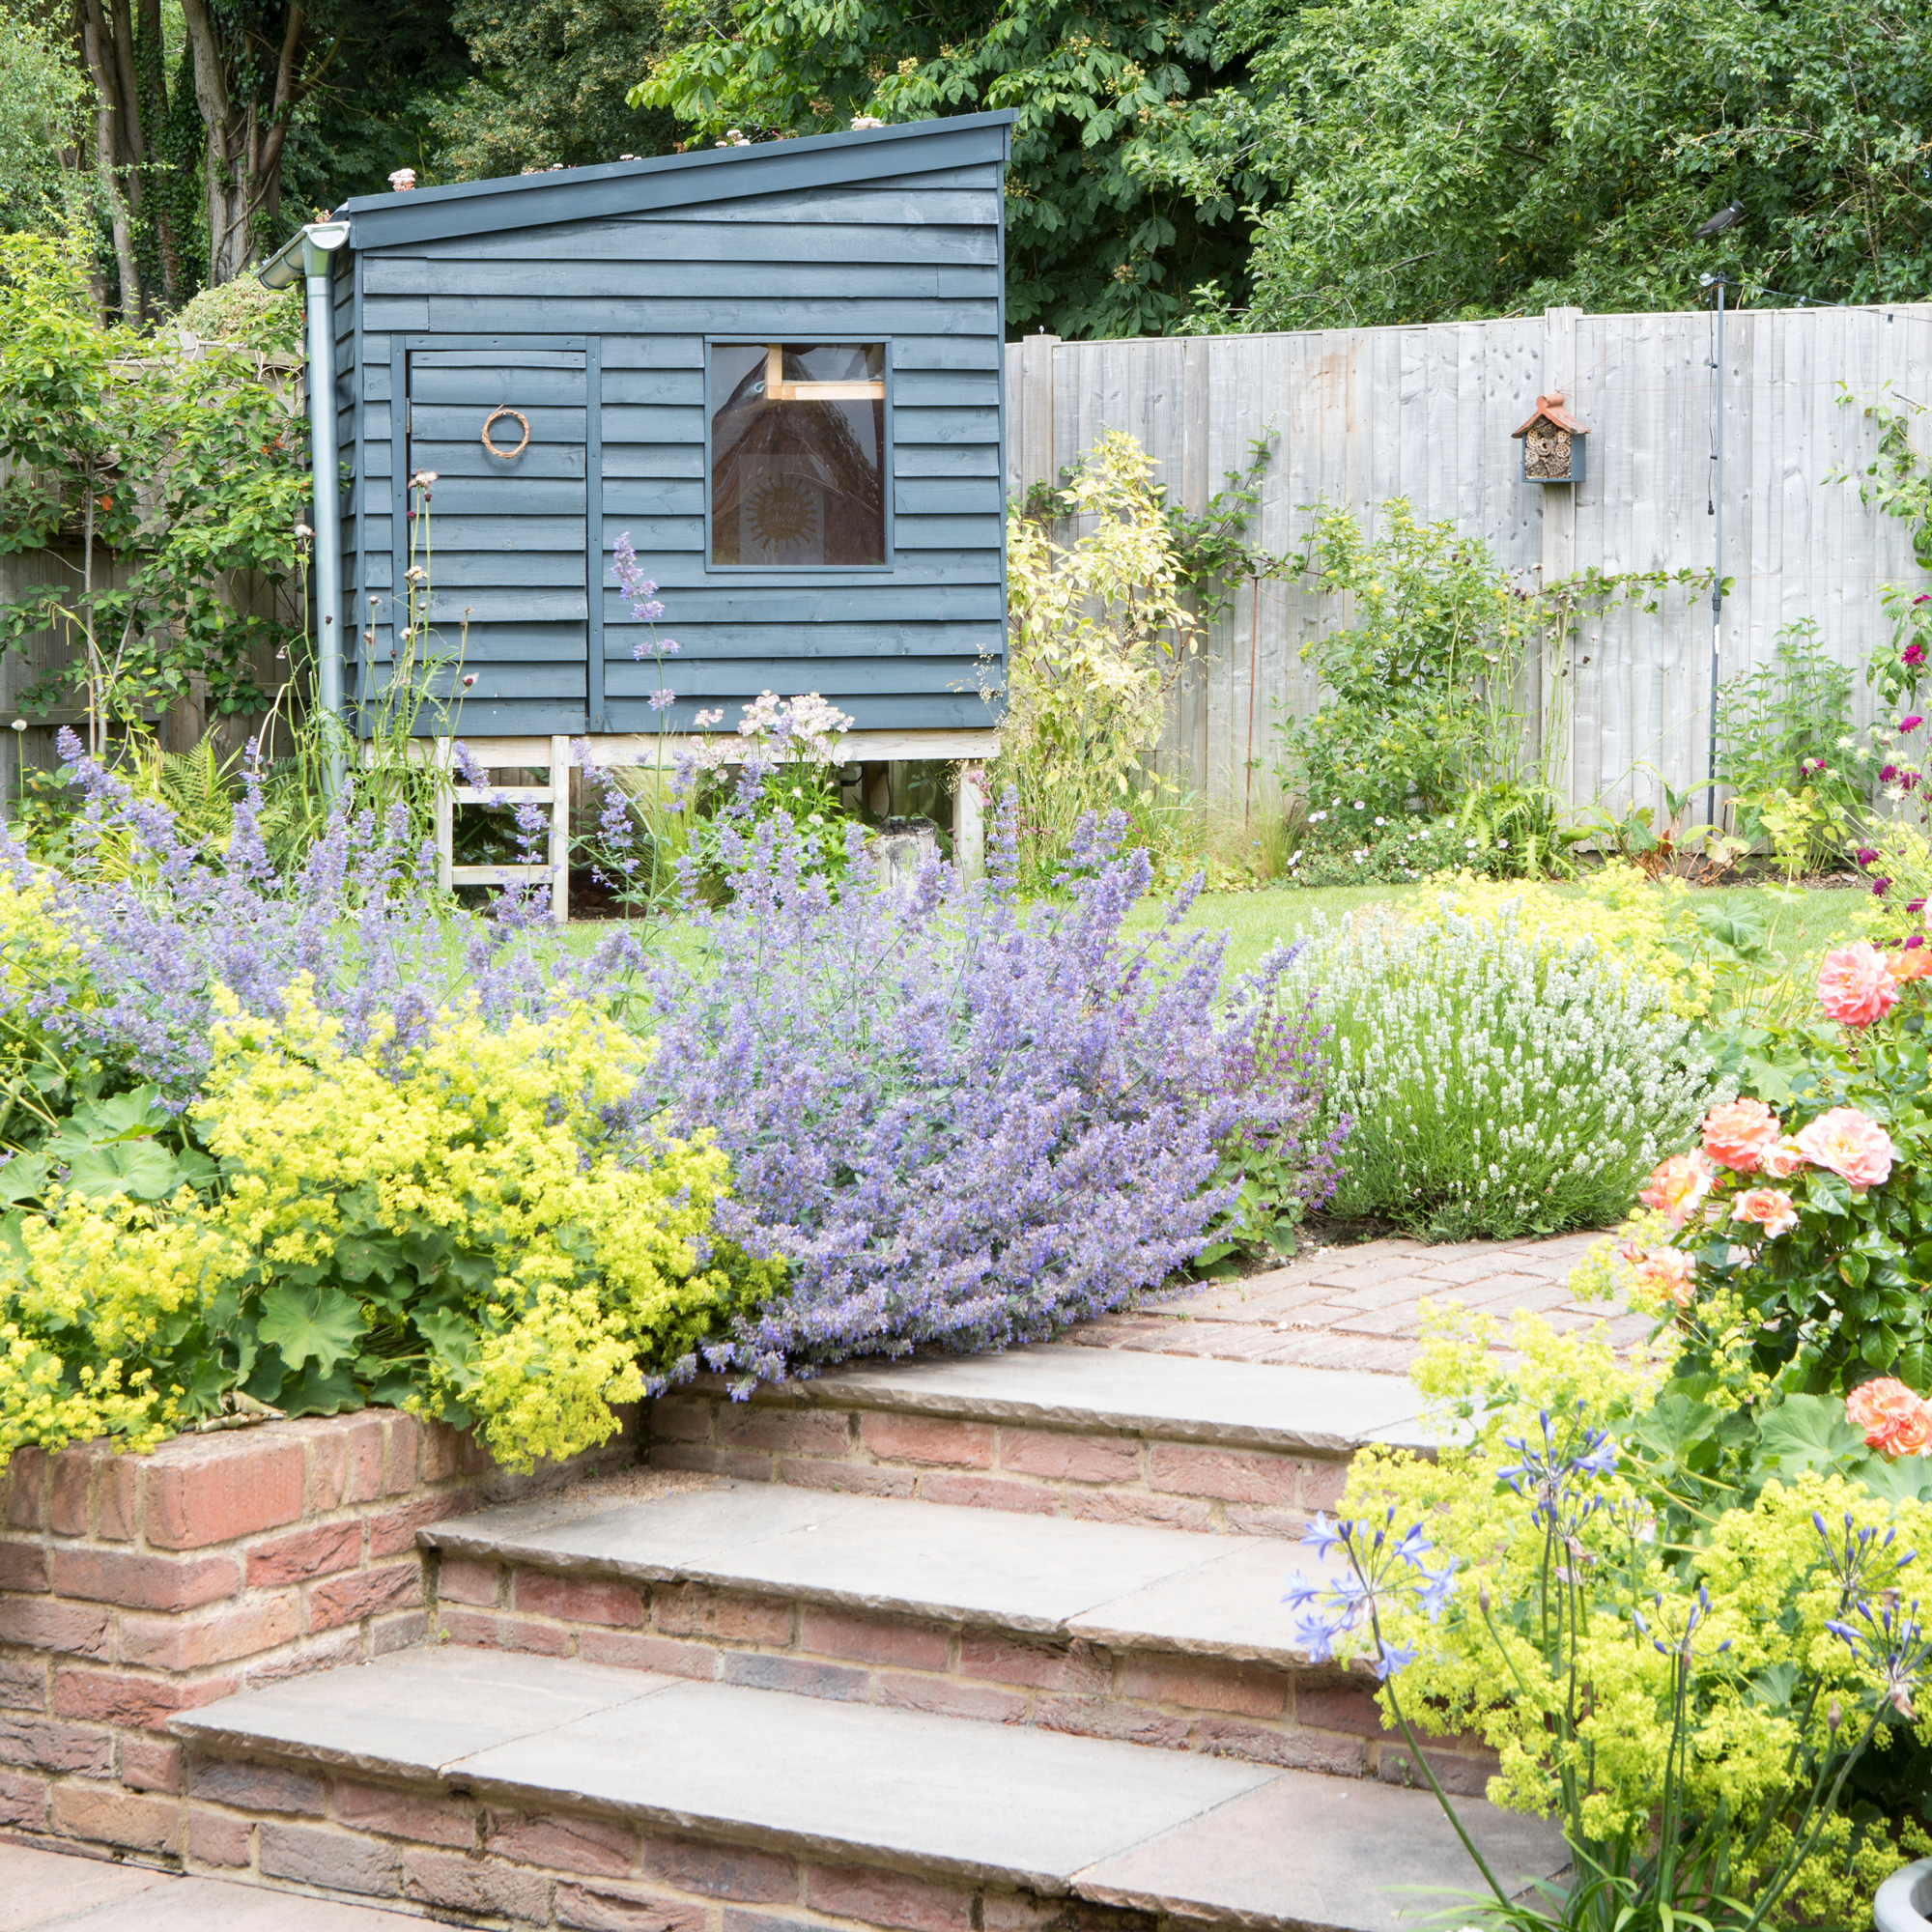 country cottage garden with plenty of planting including lavender and steps up to a wooden playhouse